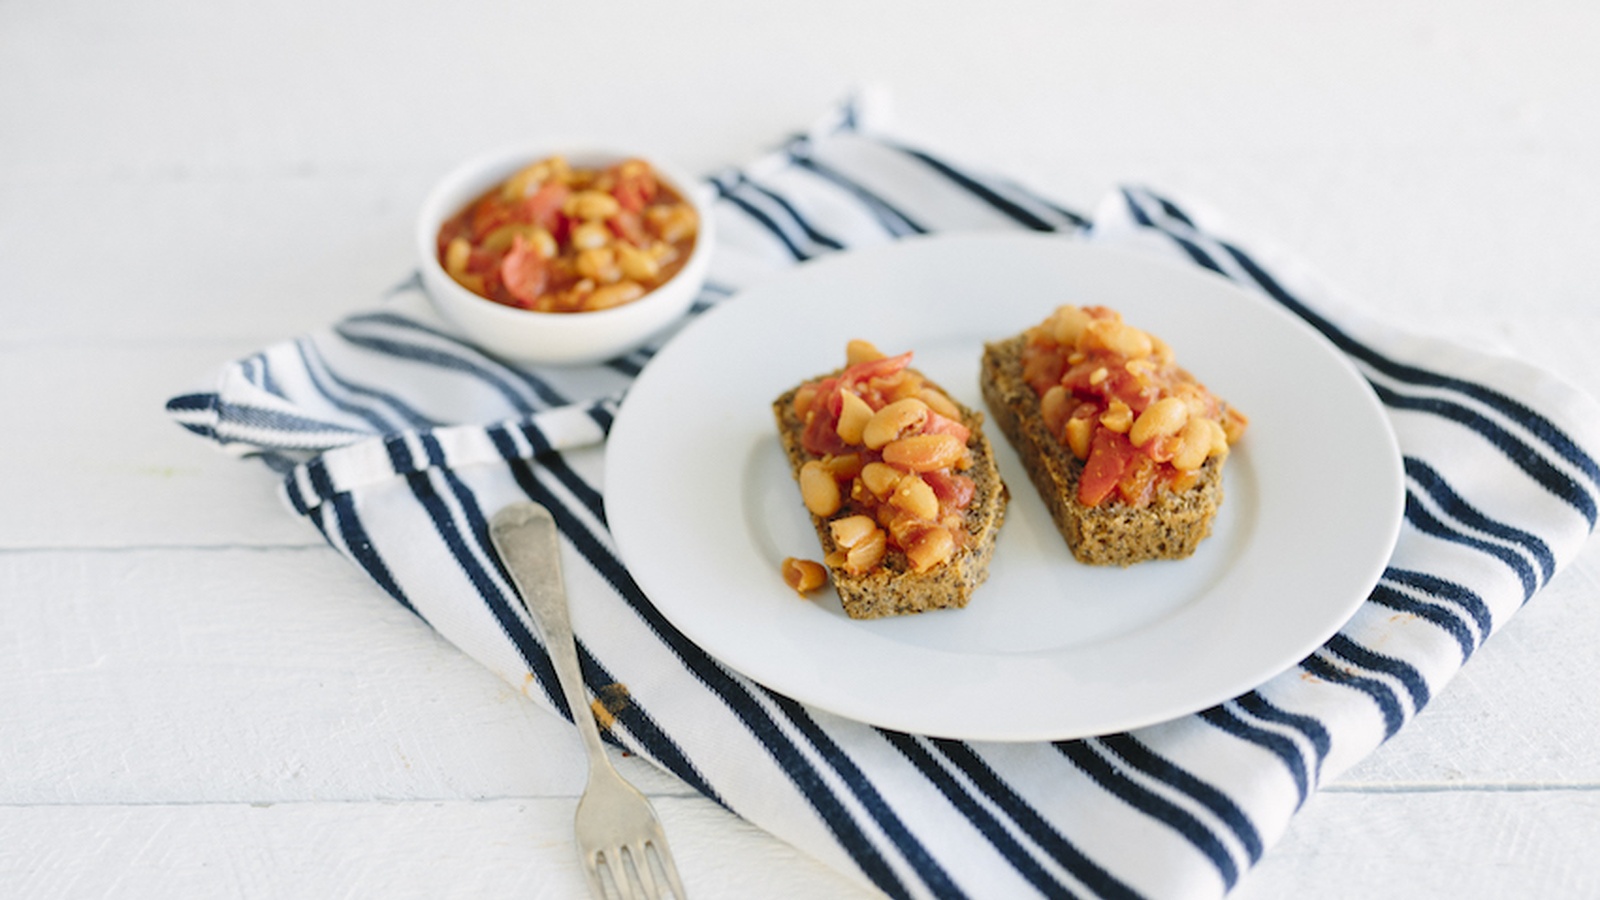 Homemade Baked Beans with Gluten-Free Bread